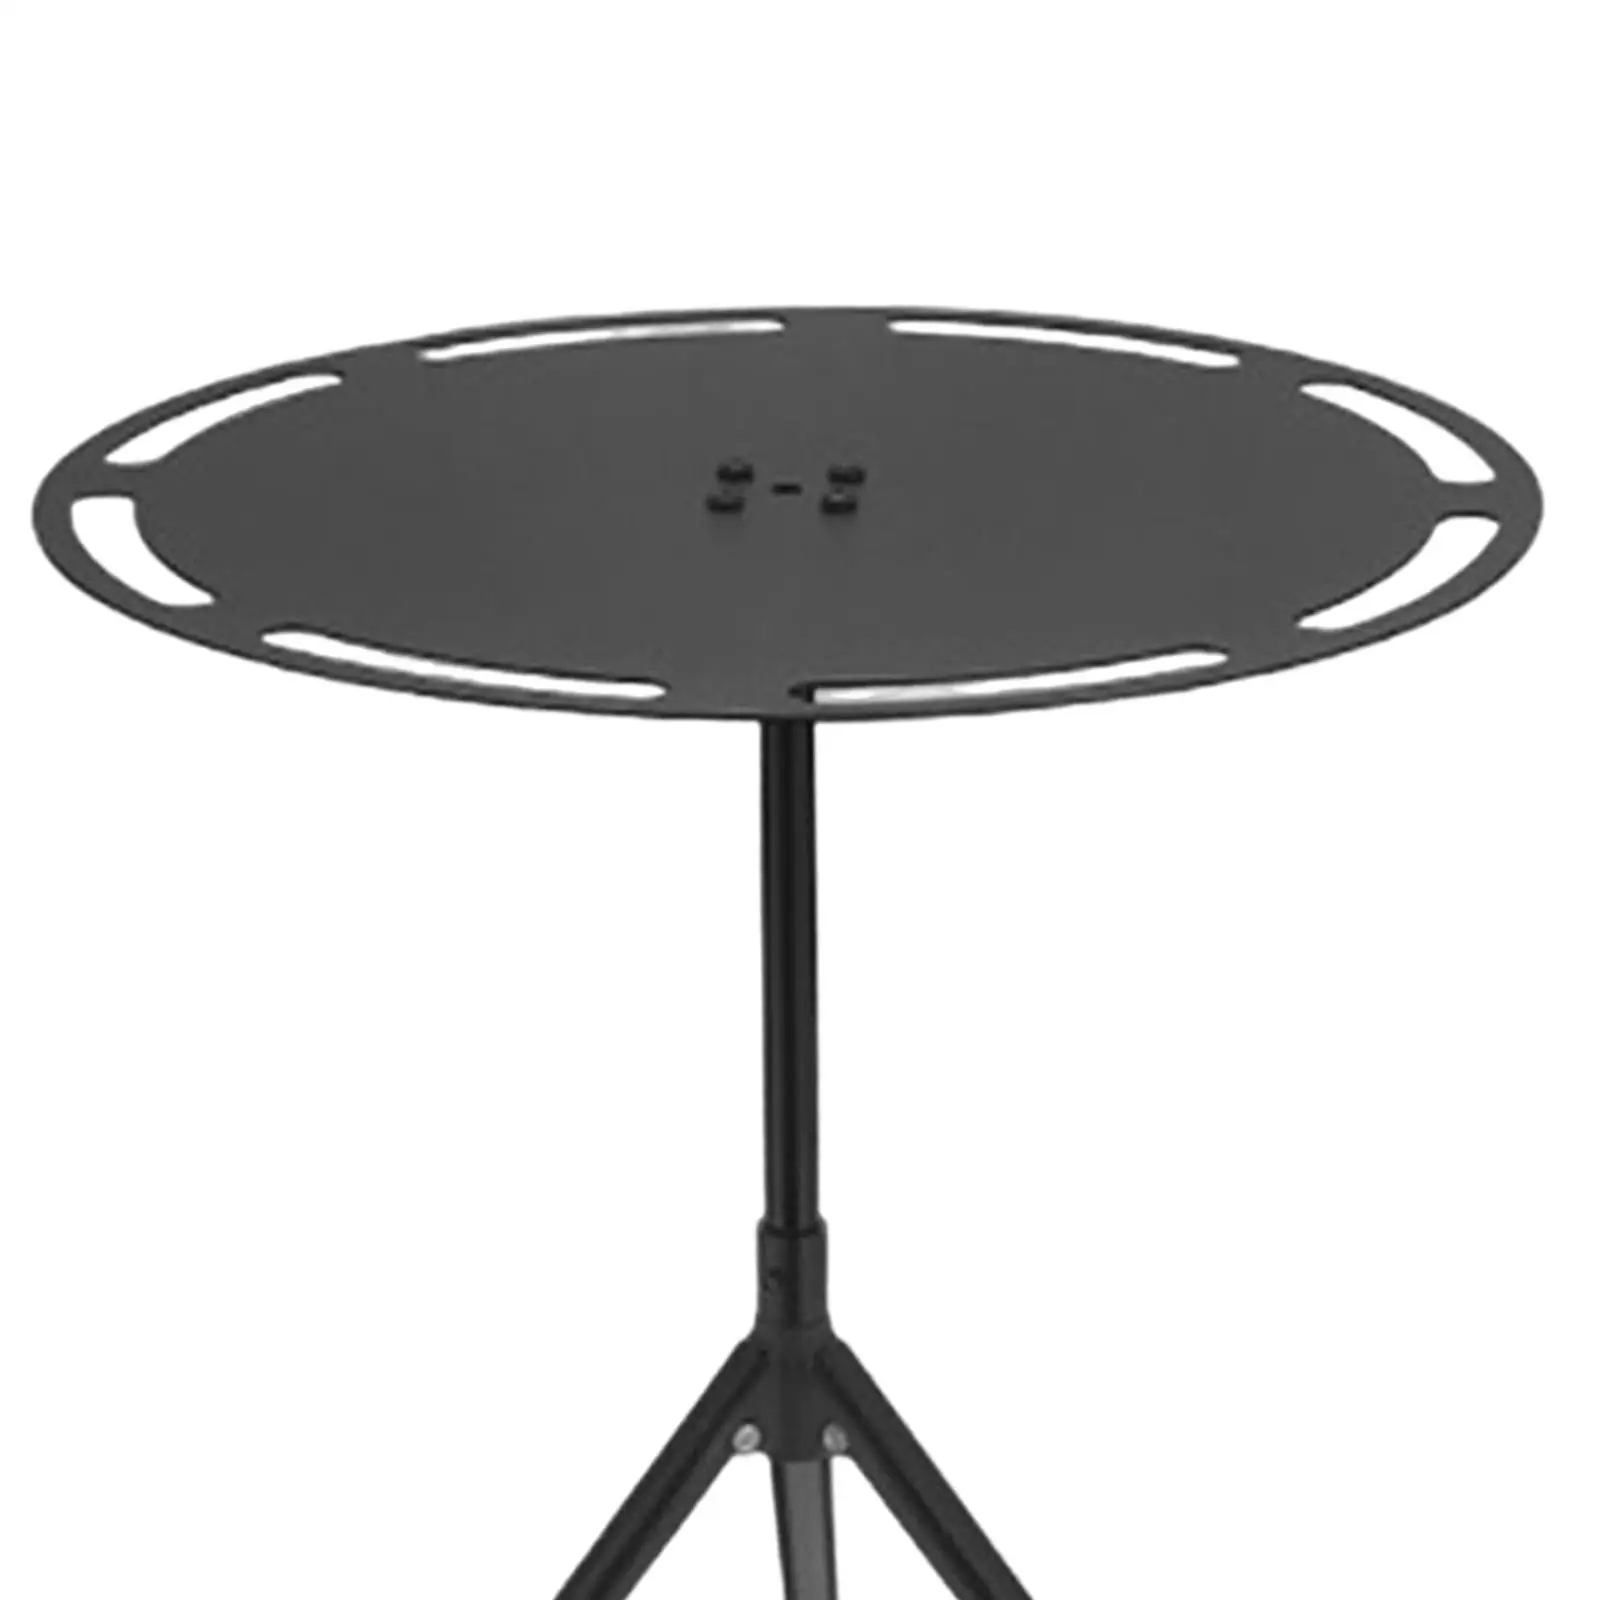 Camping Table Round Compact Height Adjustable Furniture with Carry Bag Folding Table for Outdoor Travel BBQ Fishing Mountaintop